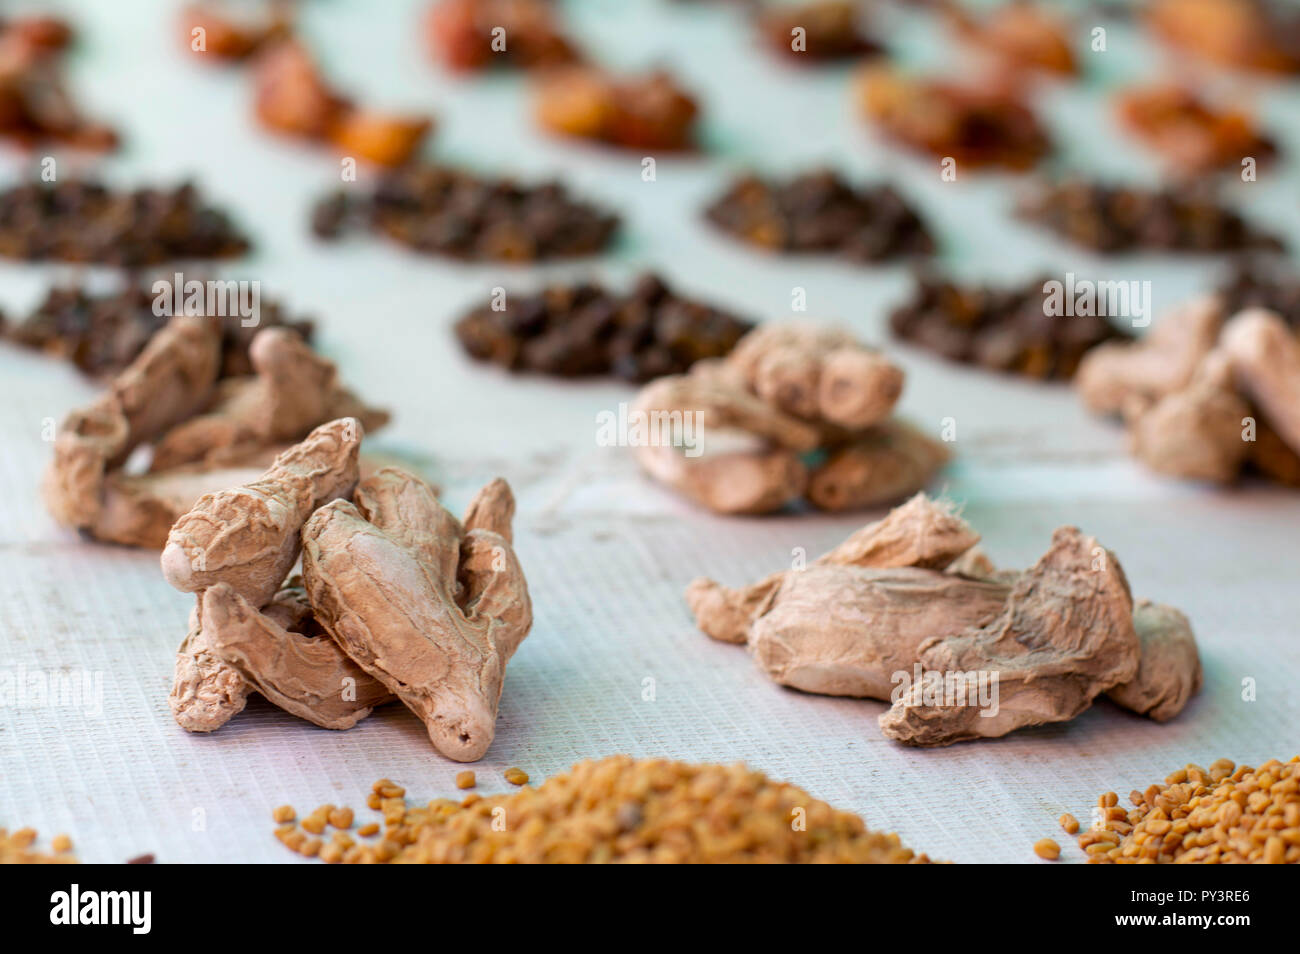 Set of different Indian spices for sale in local market, Pune Maharashtra. Stock Photo